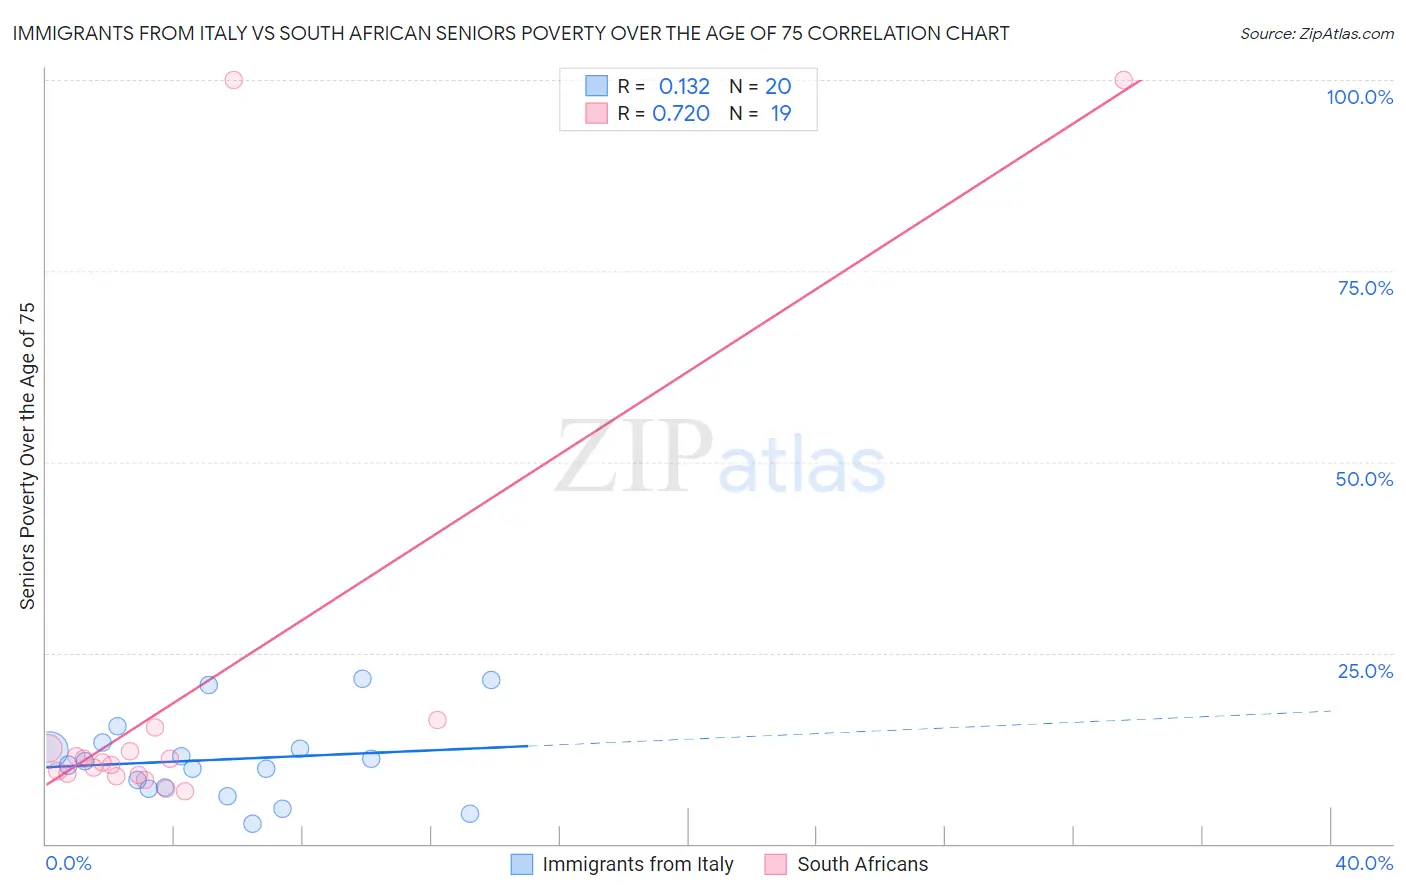 Immigrants from Italy vs South African Seniors Poverty Over the Age of 75